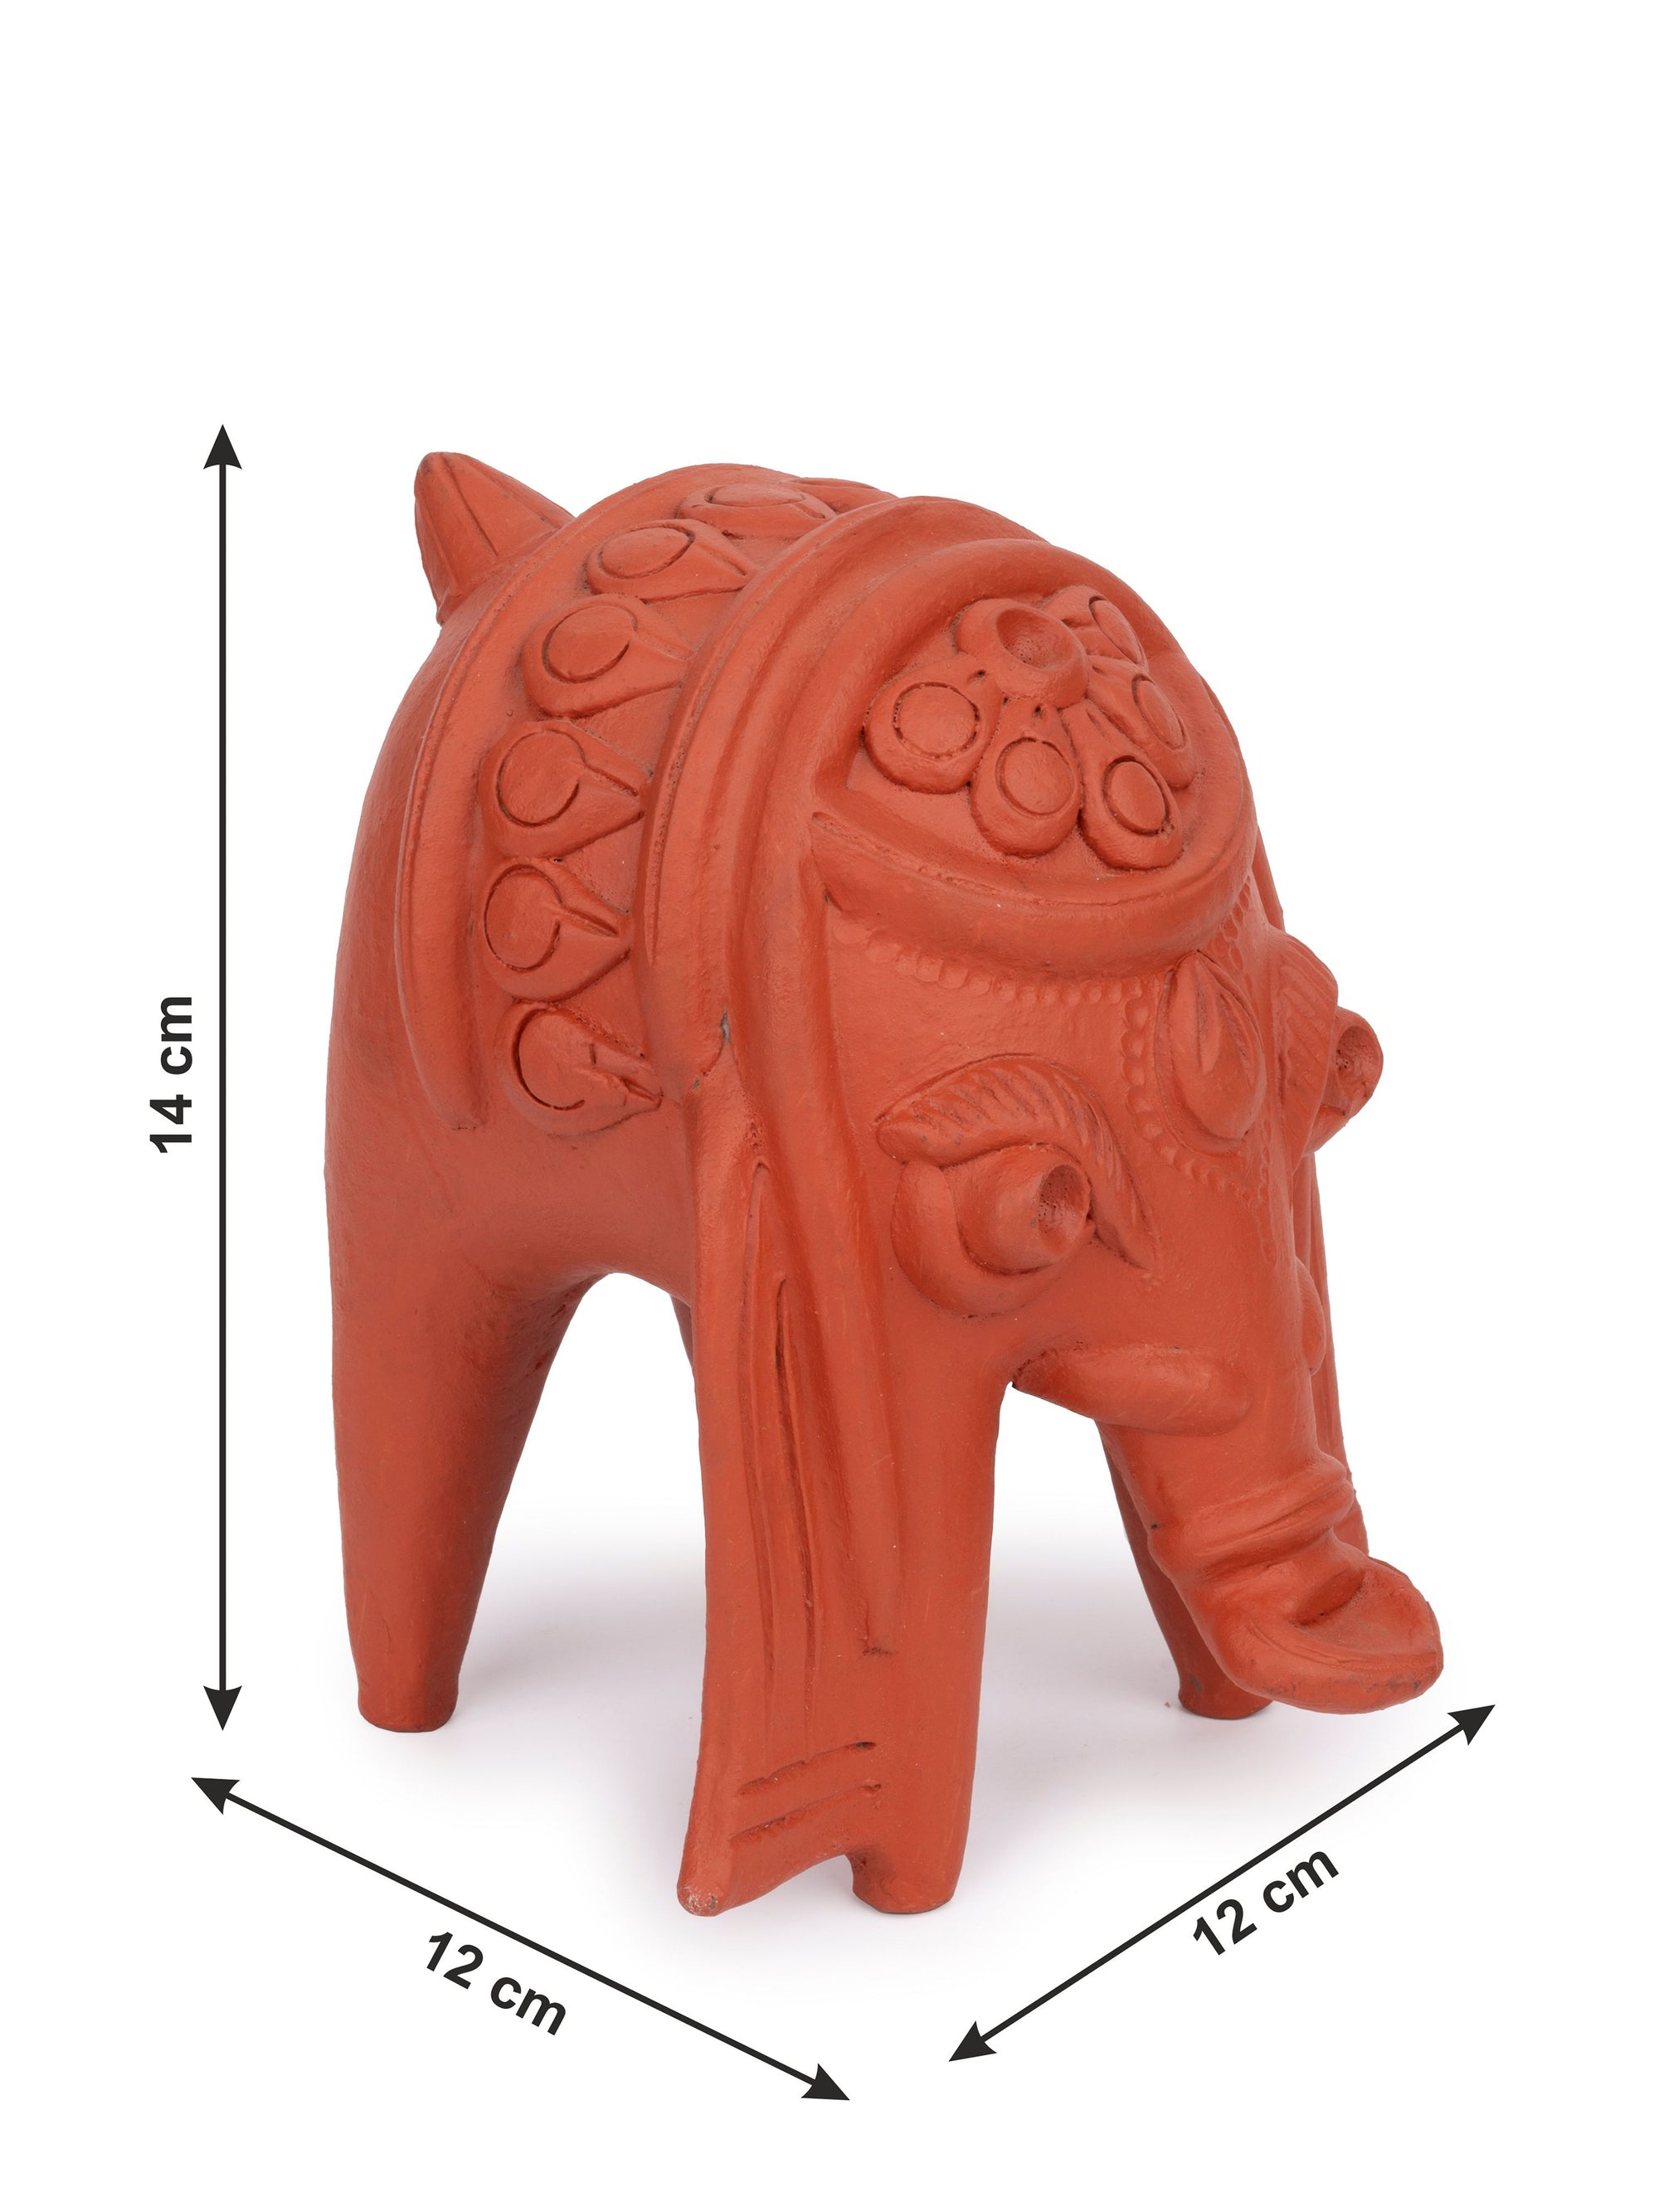 Terracotta Decorative Elephant Figurine - 6 inches height - The Heritage Artifacts